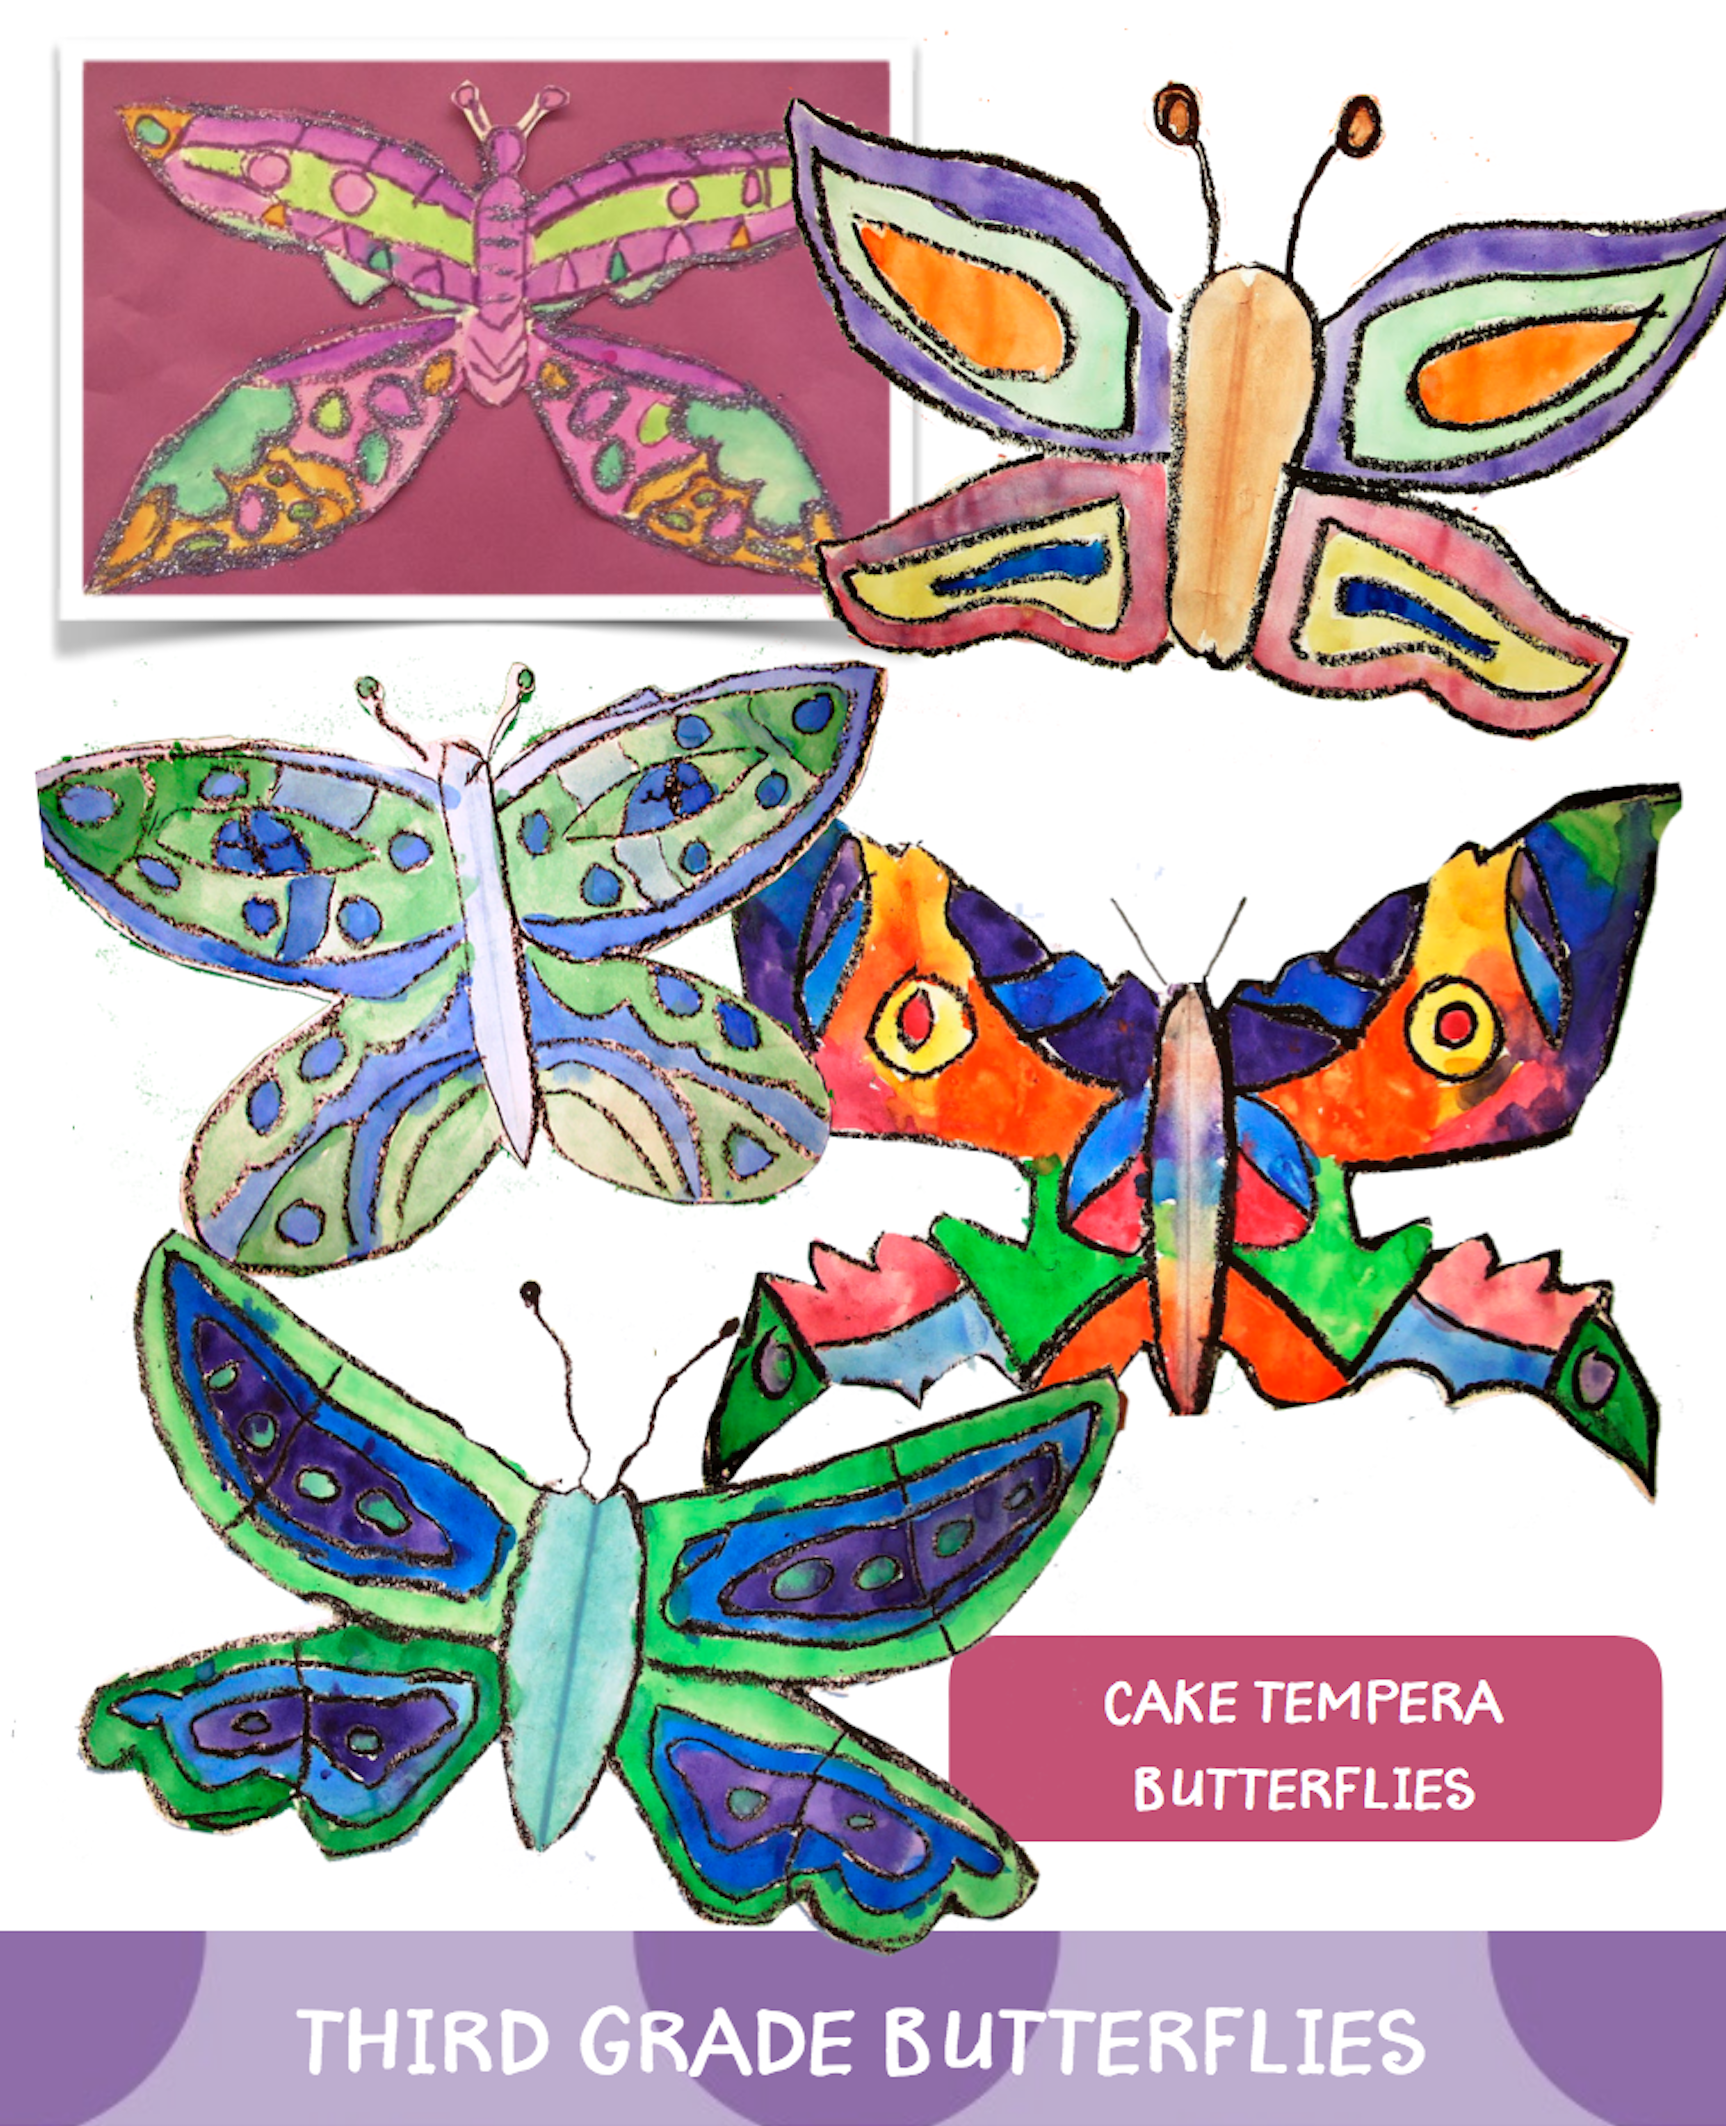 Cake tempera symmetrical butterflies with watercolors for third graders art lesson